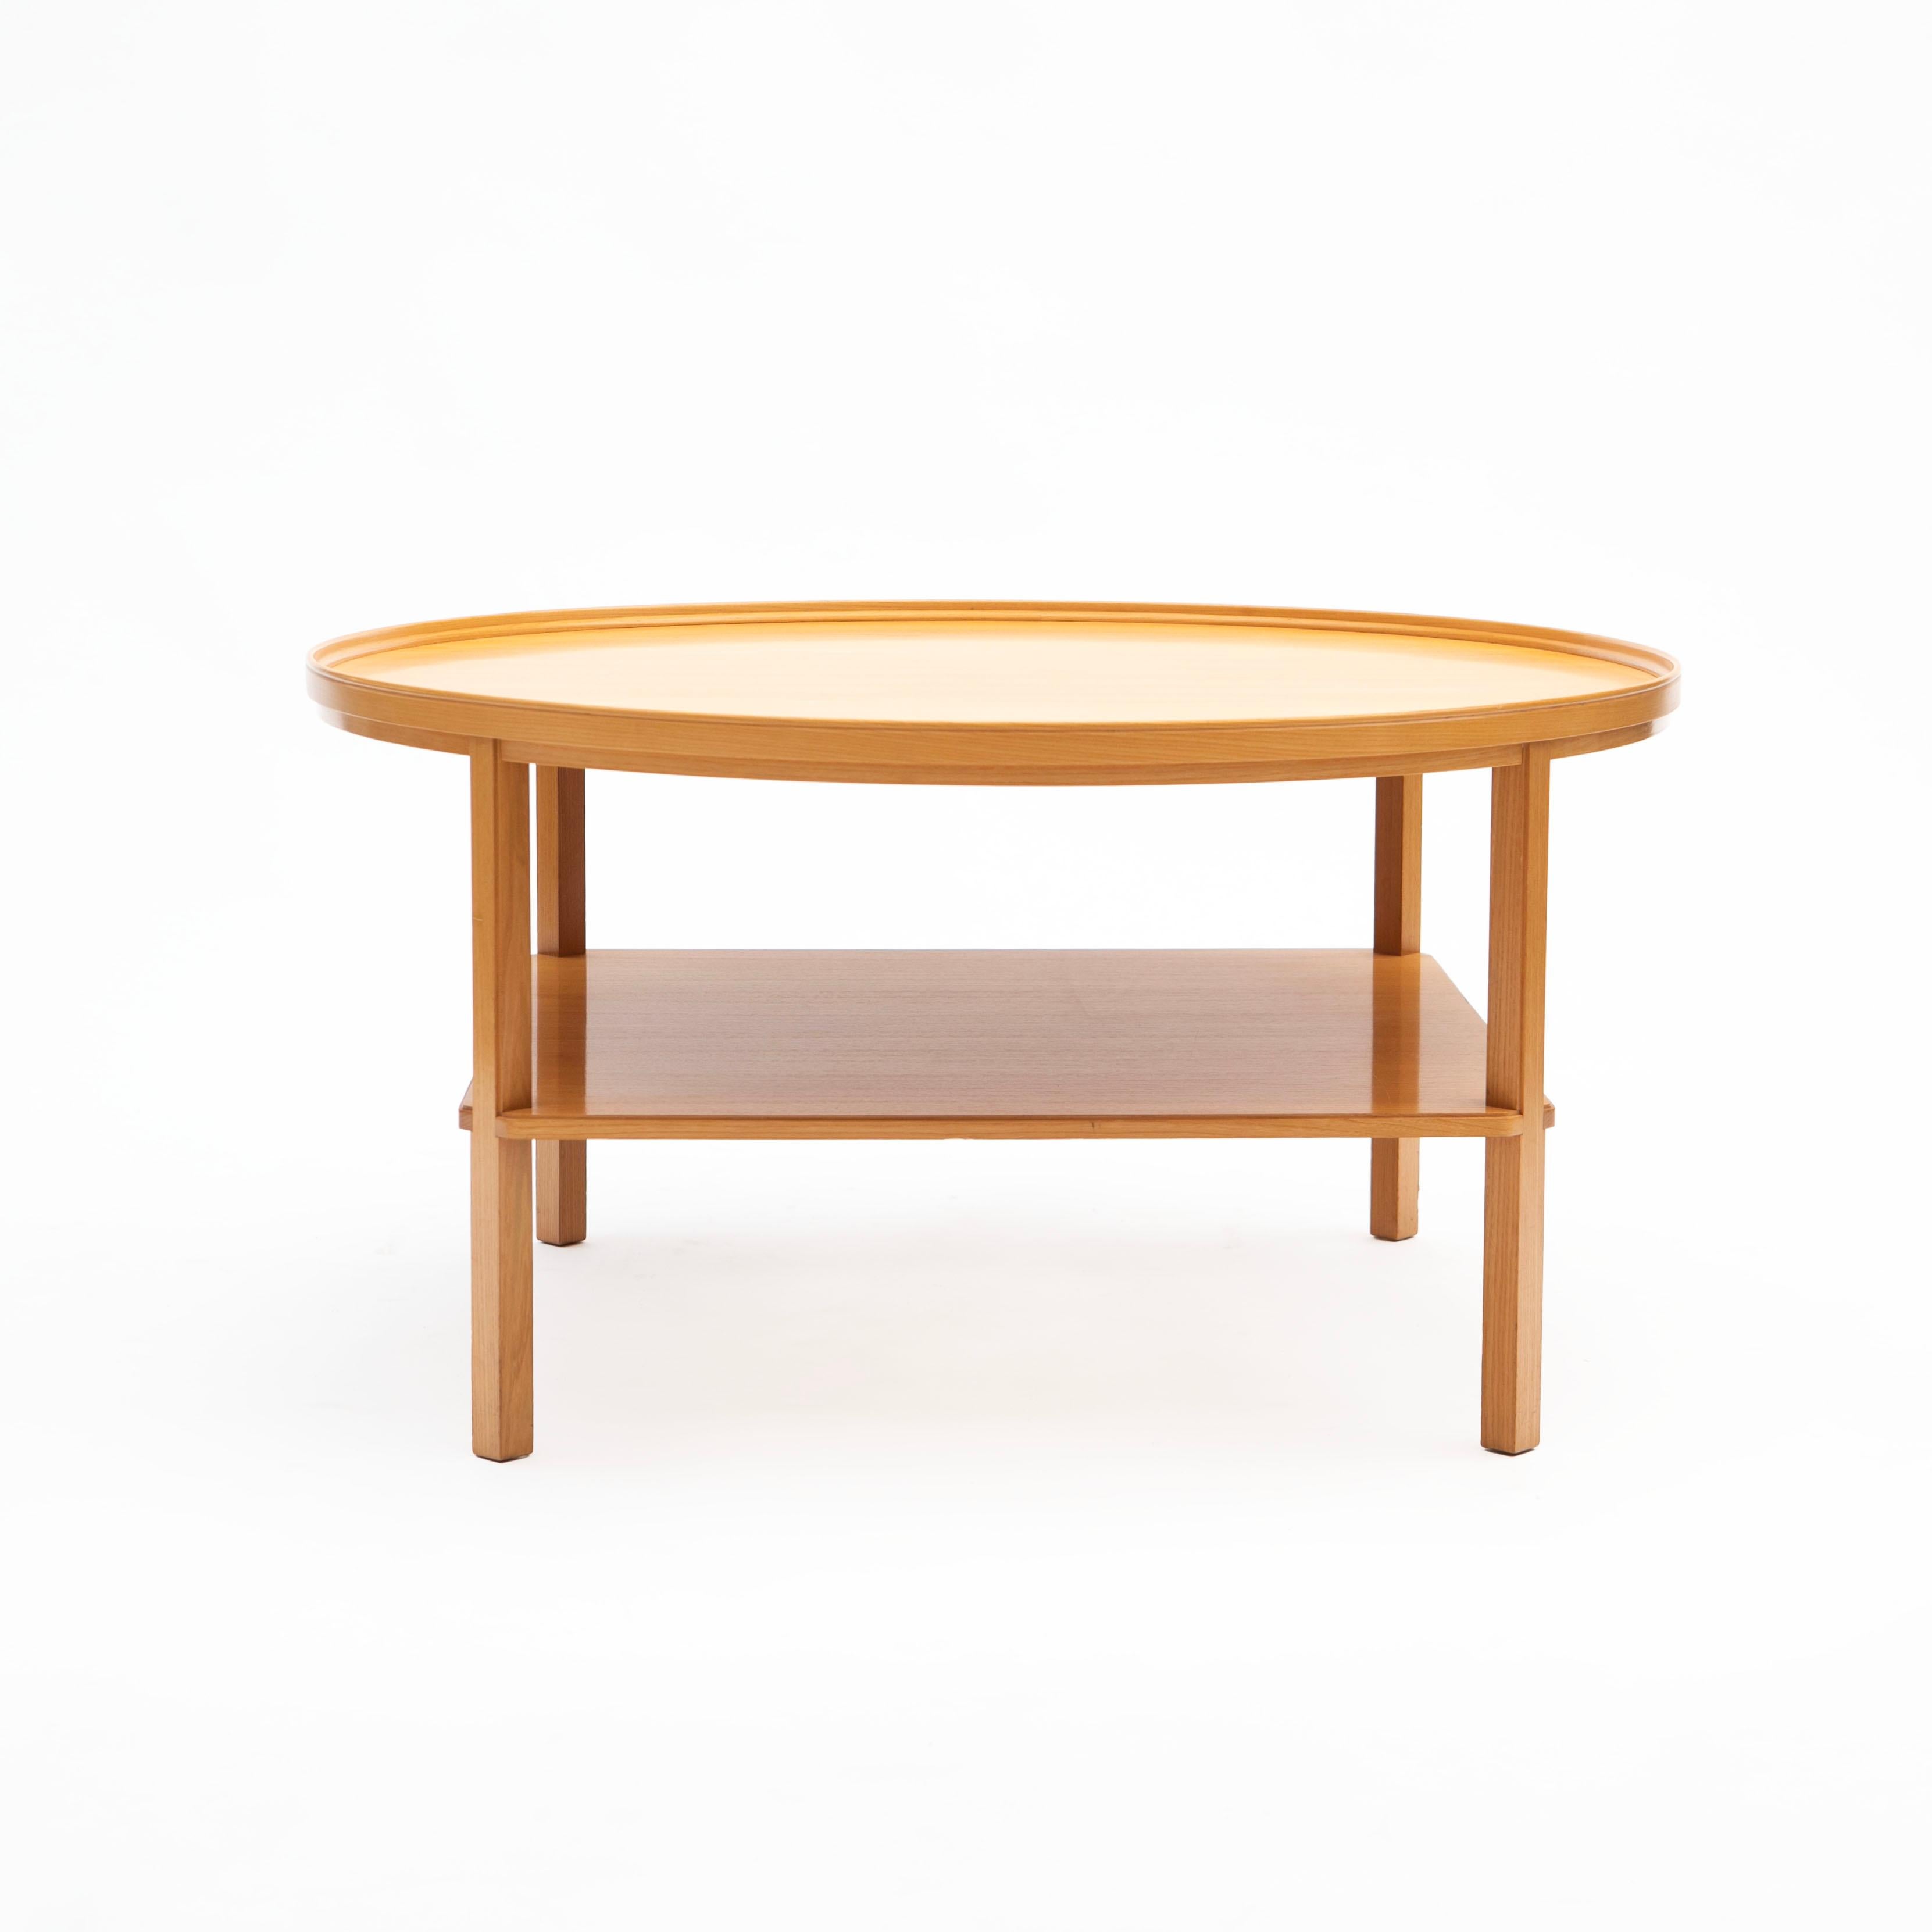 20th Century Round Kaare Klint Coffee Table in Ash Wood for Rud, Rasmussen, Model 6687 For Sale